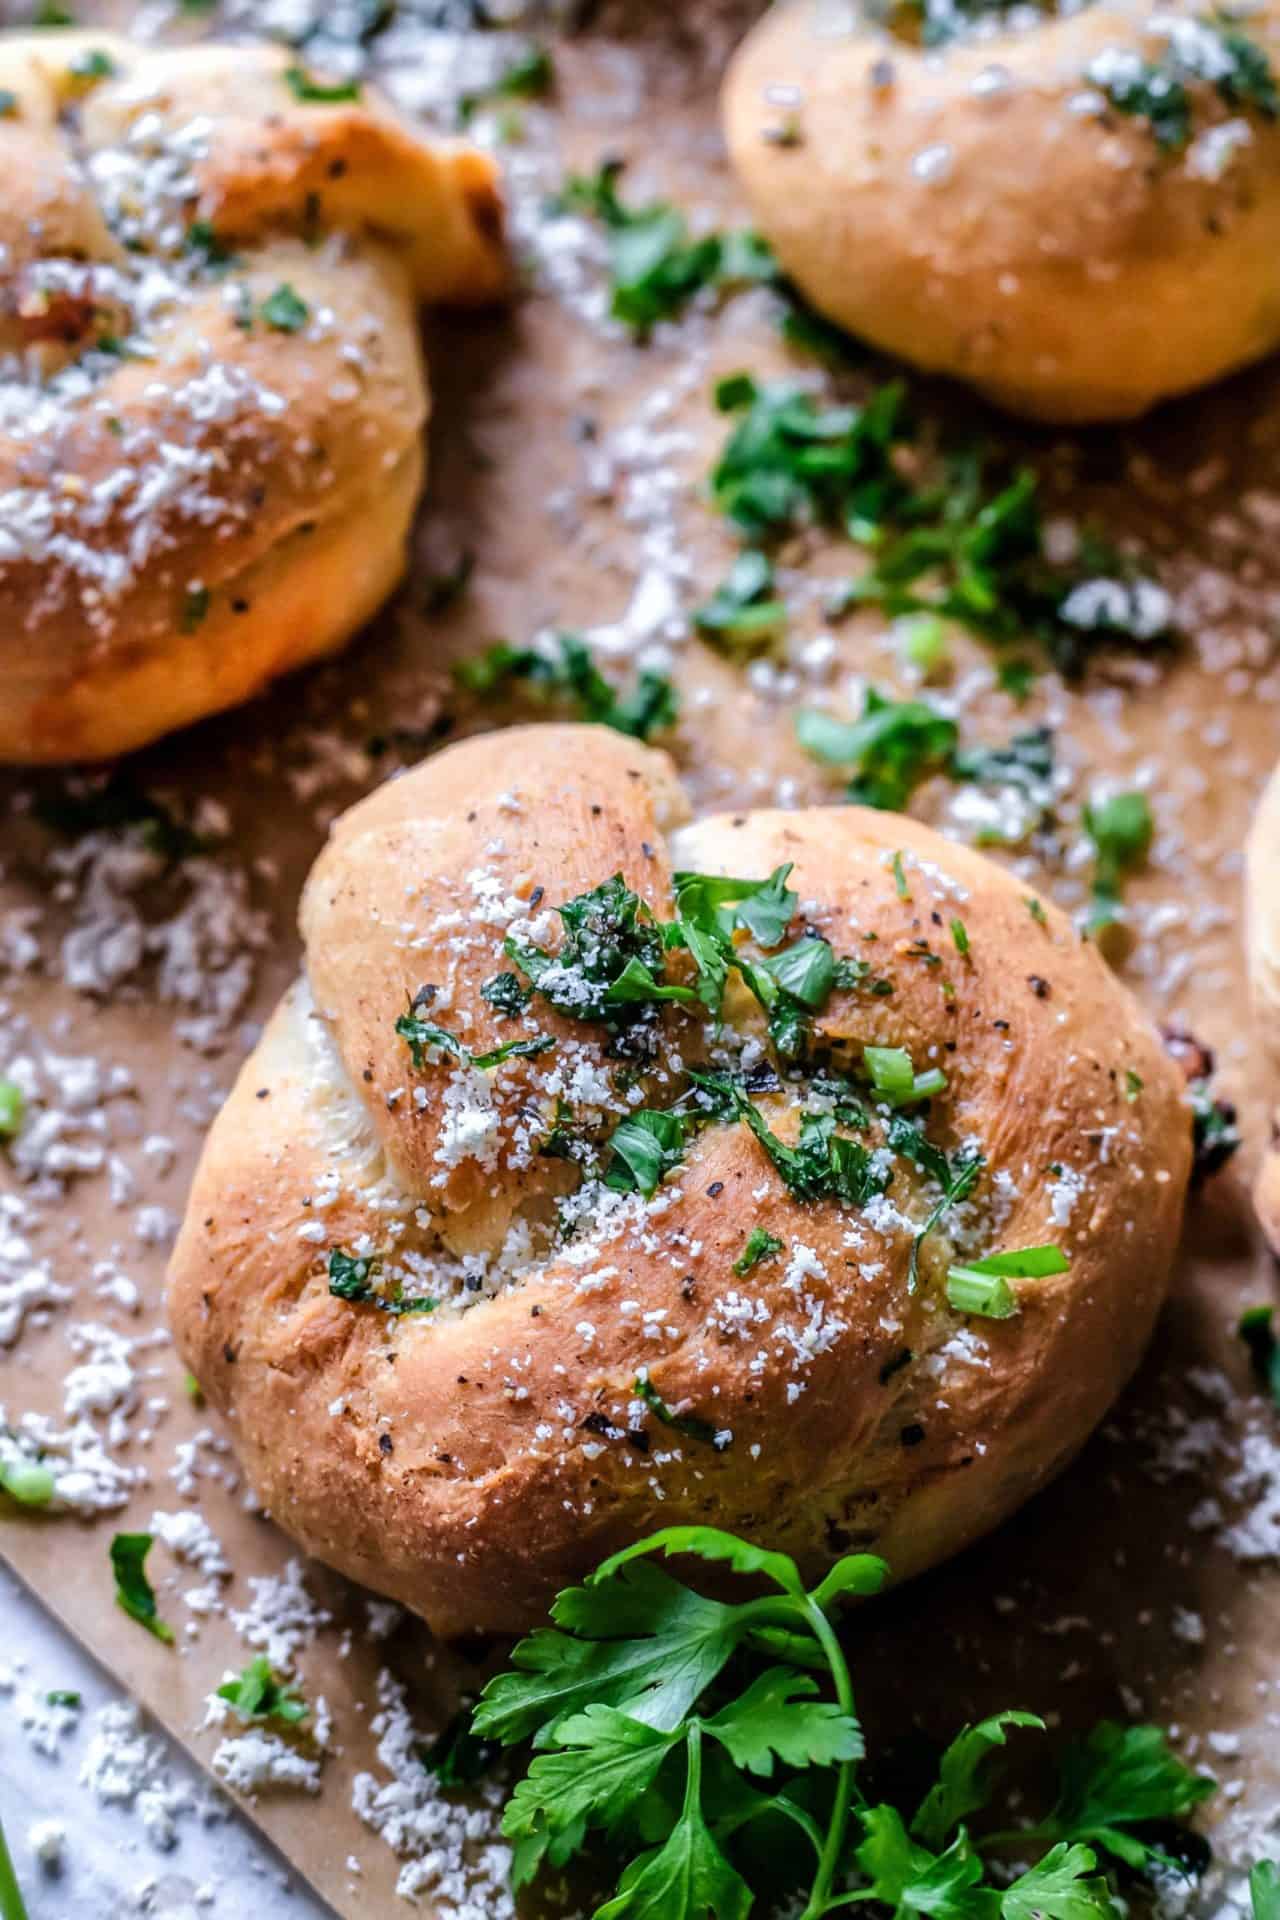 These Gluten-Free Garlic Knots are extra soft, fluffy, super flavourful, buttery, low FODMAP and with an option to make them vegan!